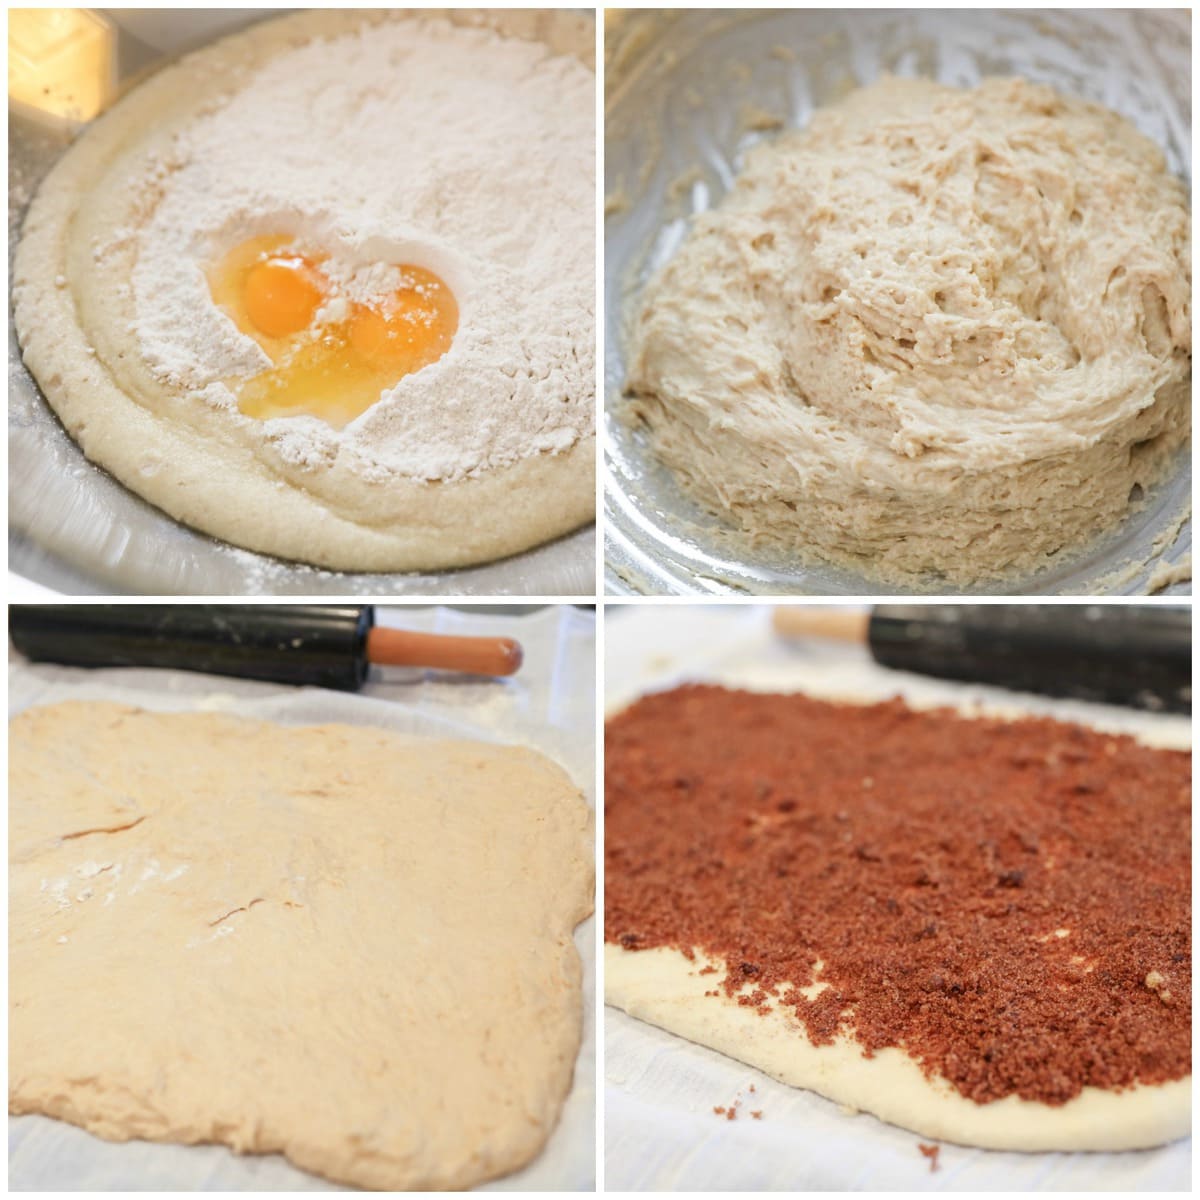 How to Make One Hour Cinnamon Roll process pics.